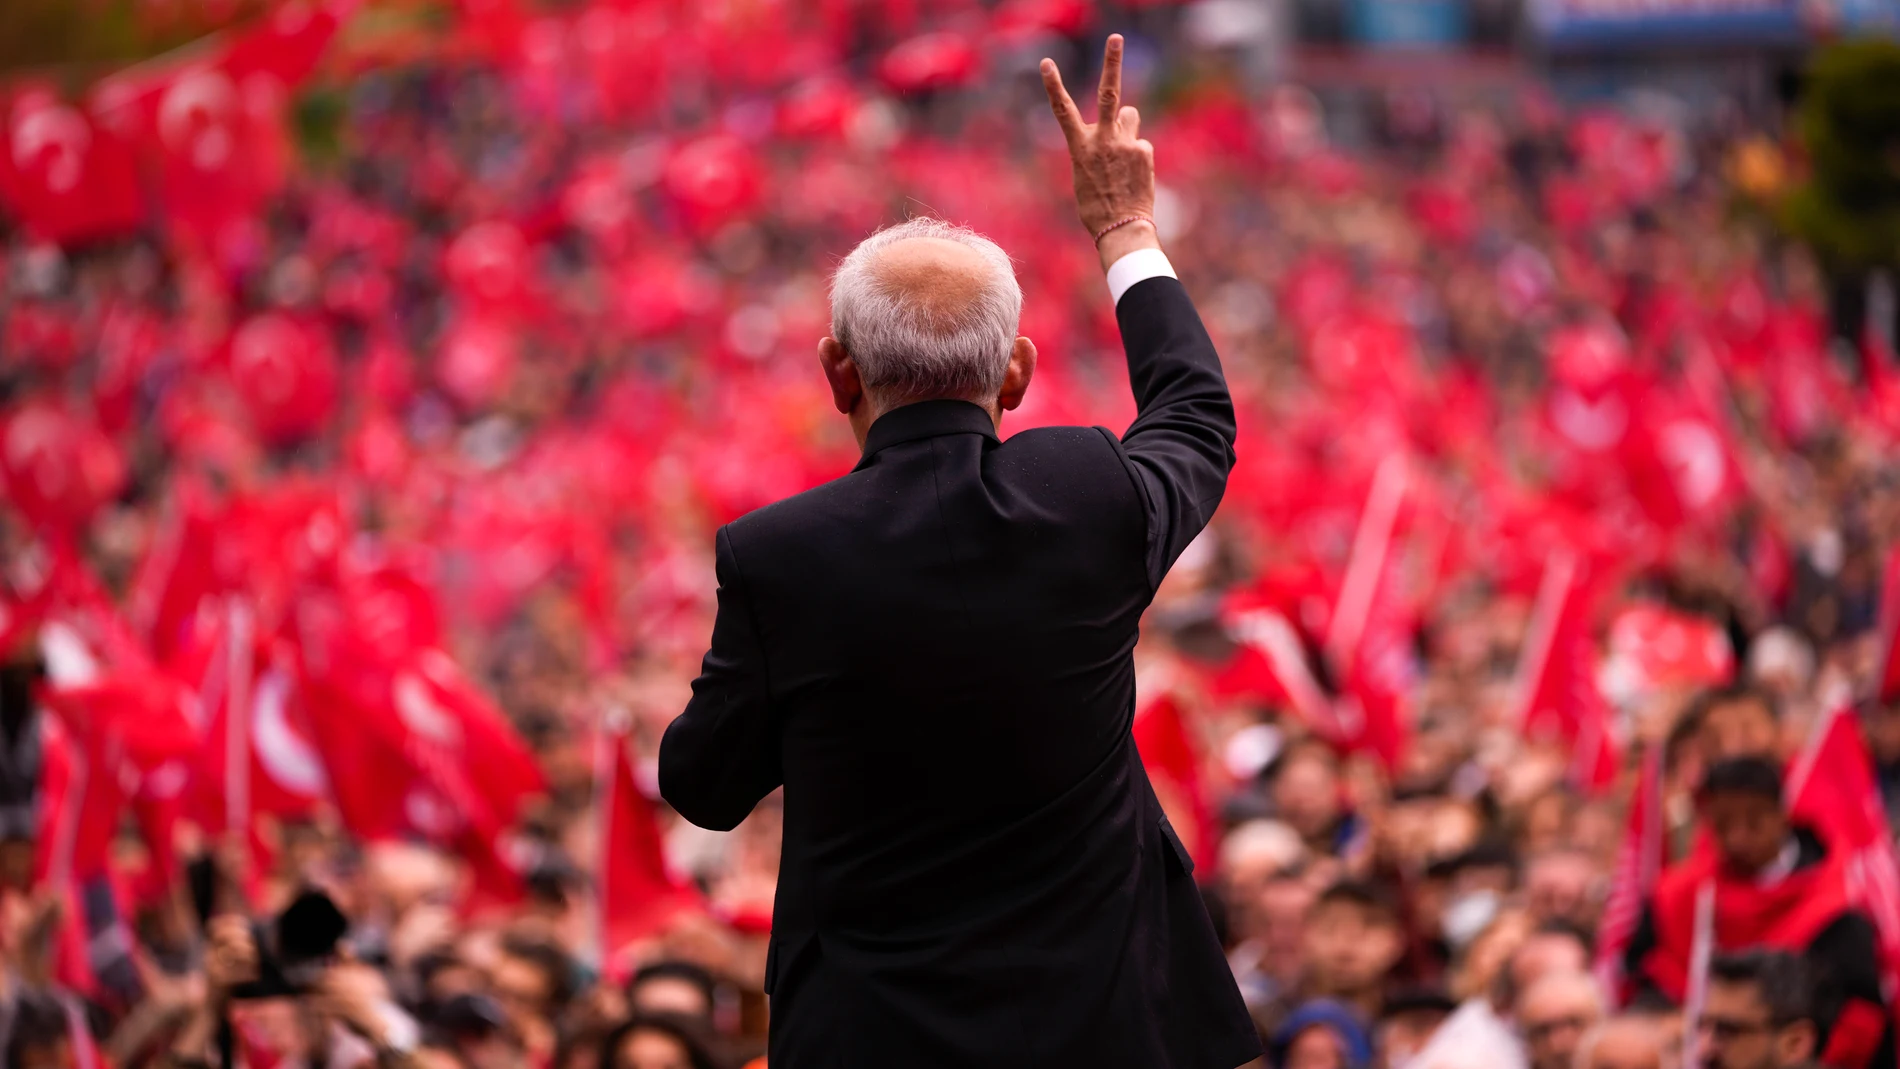 Kemal Kilicdaroglu, leader of Turkey's main opposition Republican People's Party, CHP, speaks at a campaign rally in Tekirdag, Turkey, on Thursday, April 27, 2023. Kilicdaroglu, the main challenger to President Recep Tayyip Erdogan in the May 14 election, cuts a starkly different figure than the incumbent who has led the country for two decades. As the polarizing Erdogan has grown increasingly authoritarian, Kilicdaroglu has a reputation as a bridge builder and vows to restore democracy. (AP Photo/Francisco Seco)